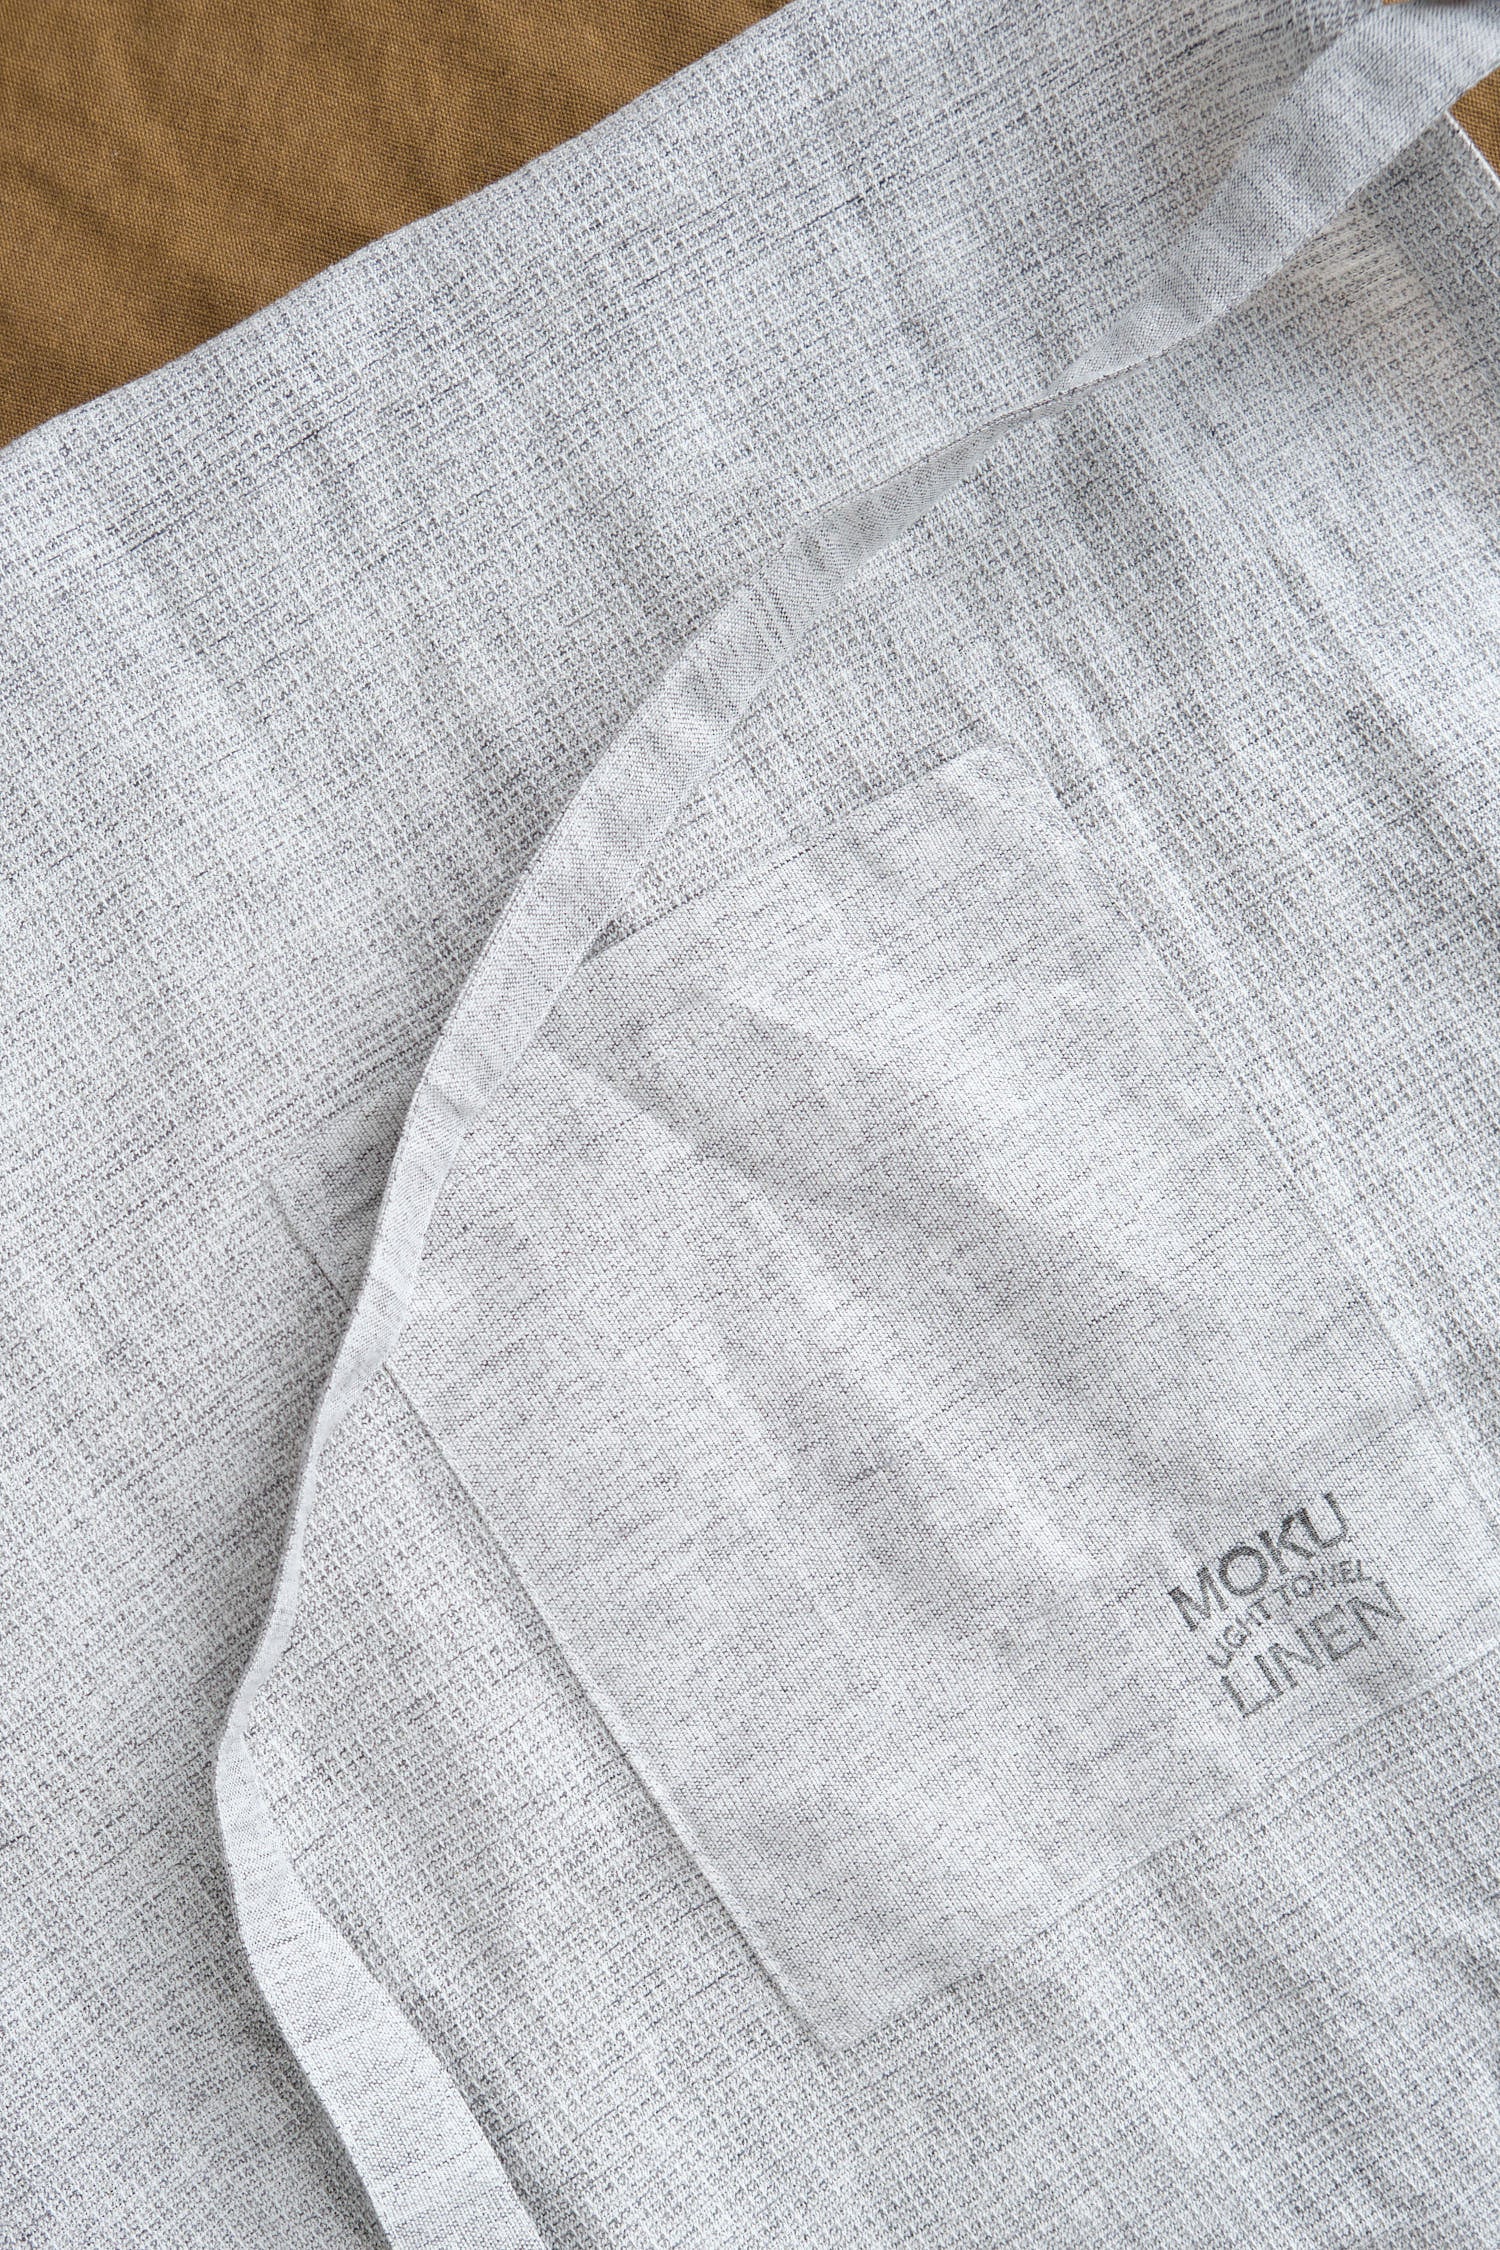 Strap on Moku Linen Apron in Charcoal